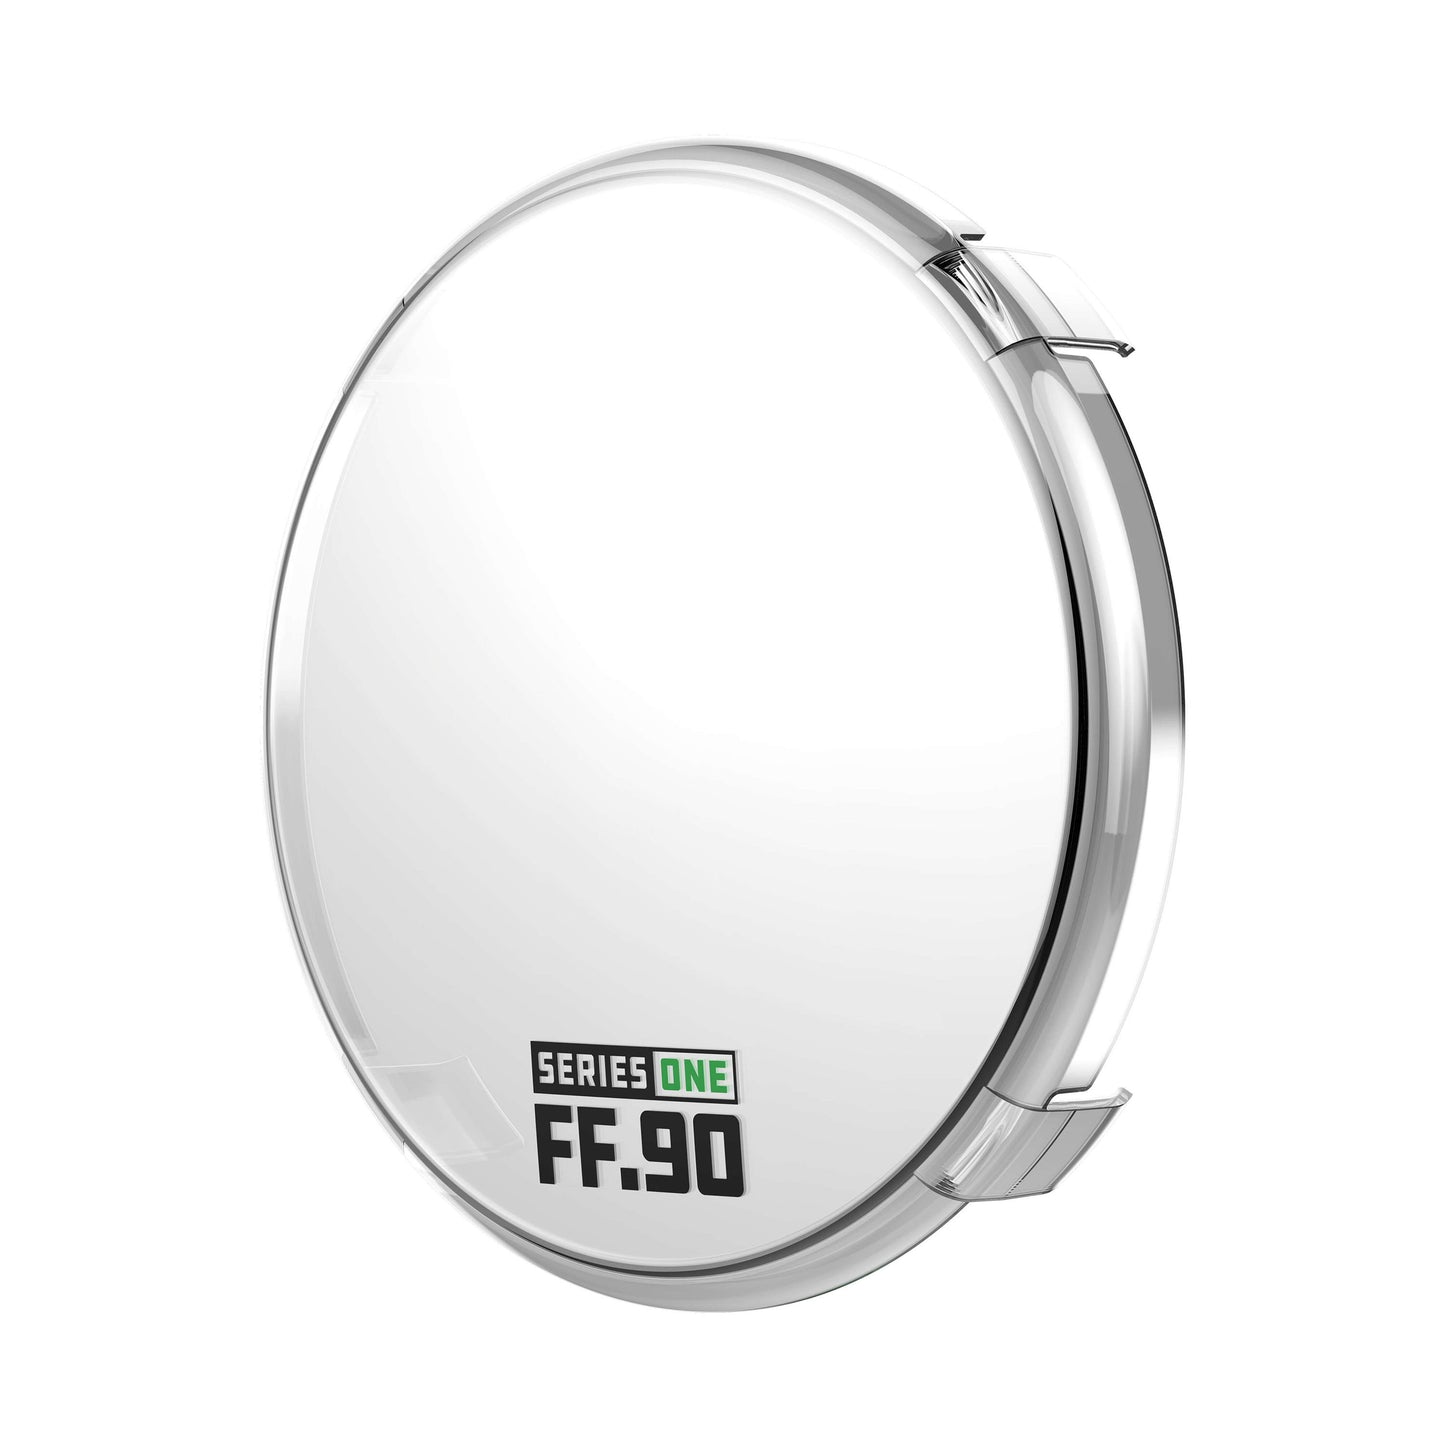 PROJECT X - SERIES ONE LENS PROTECTOR FF.90 - CLEAR AC538809-1